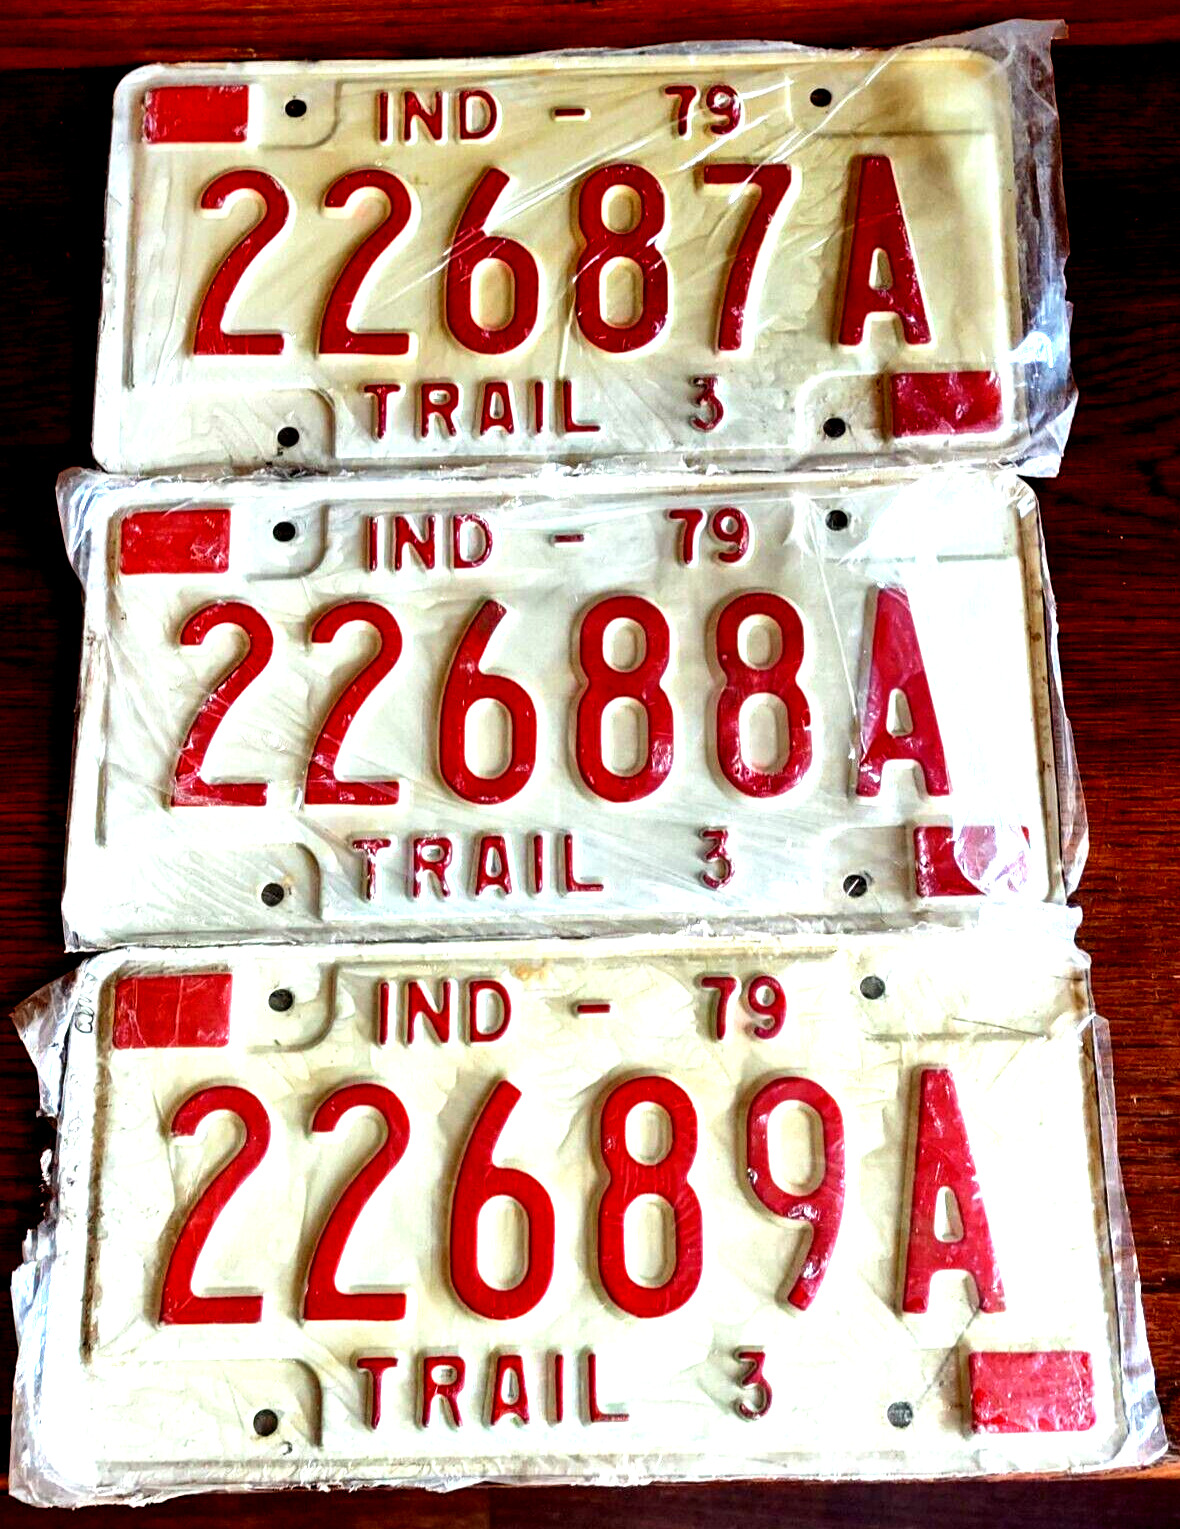 3 Consecutive Indiana 1979 Red White Expired License Plate Tags Trail 3 Trailer